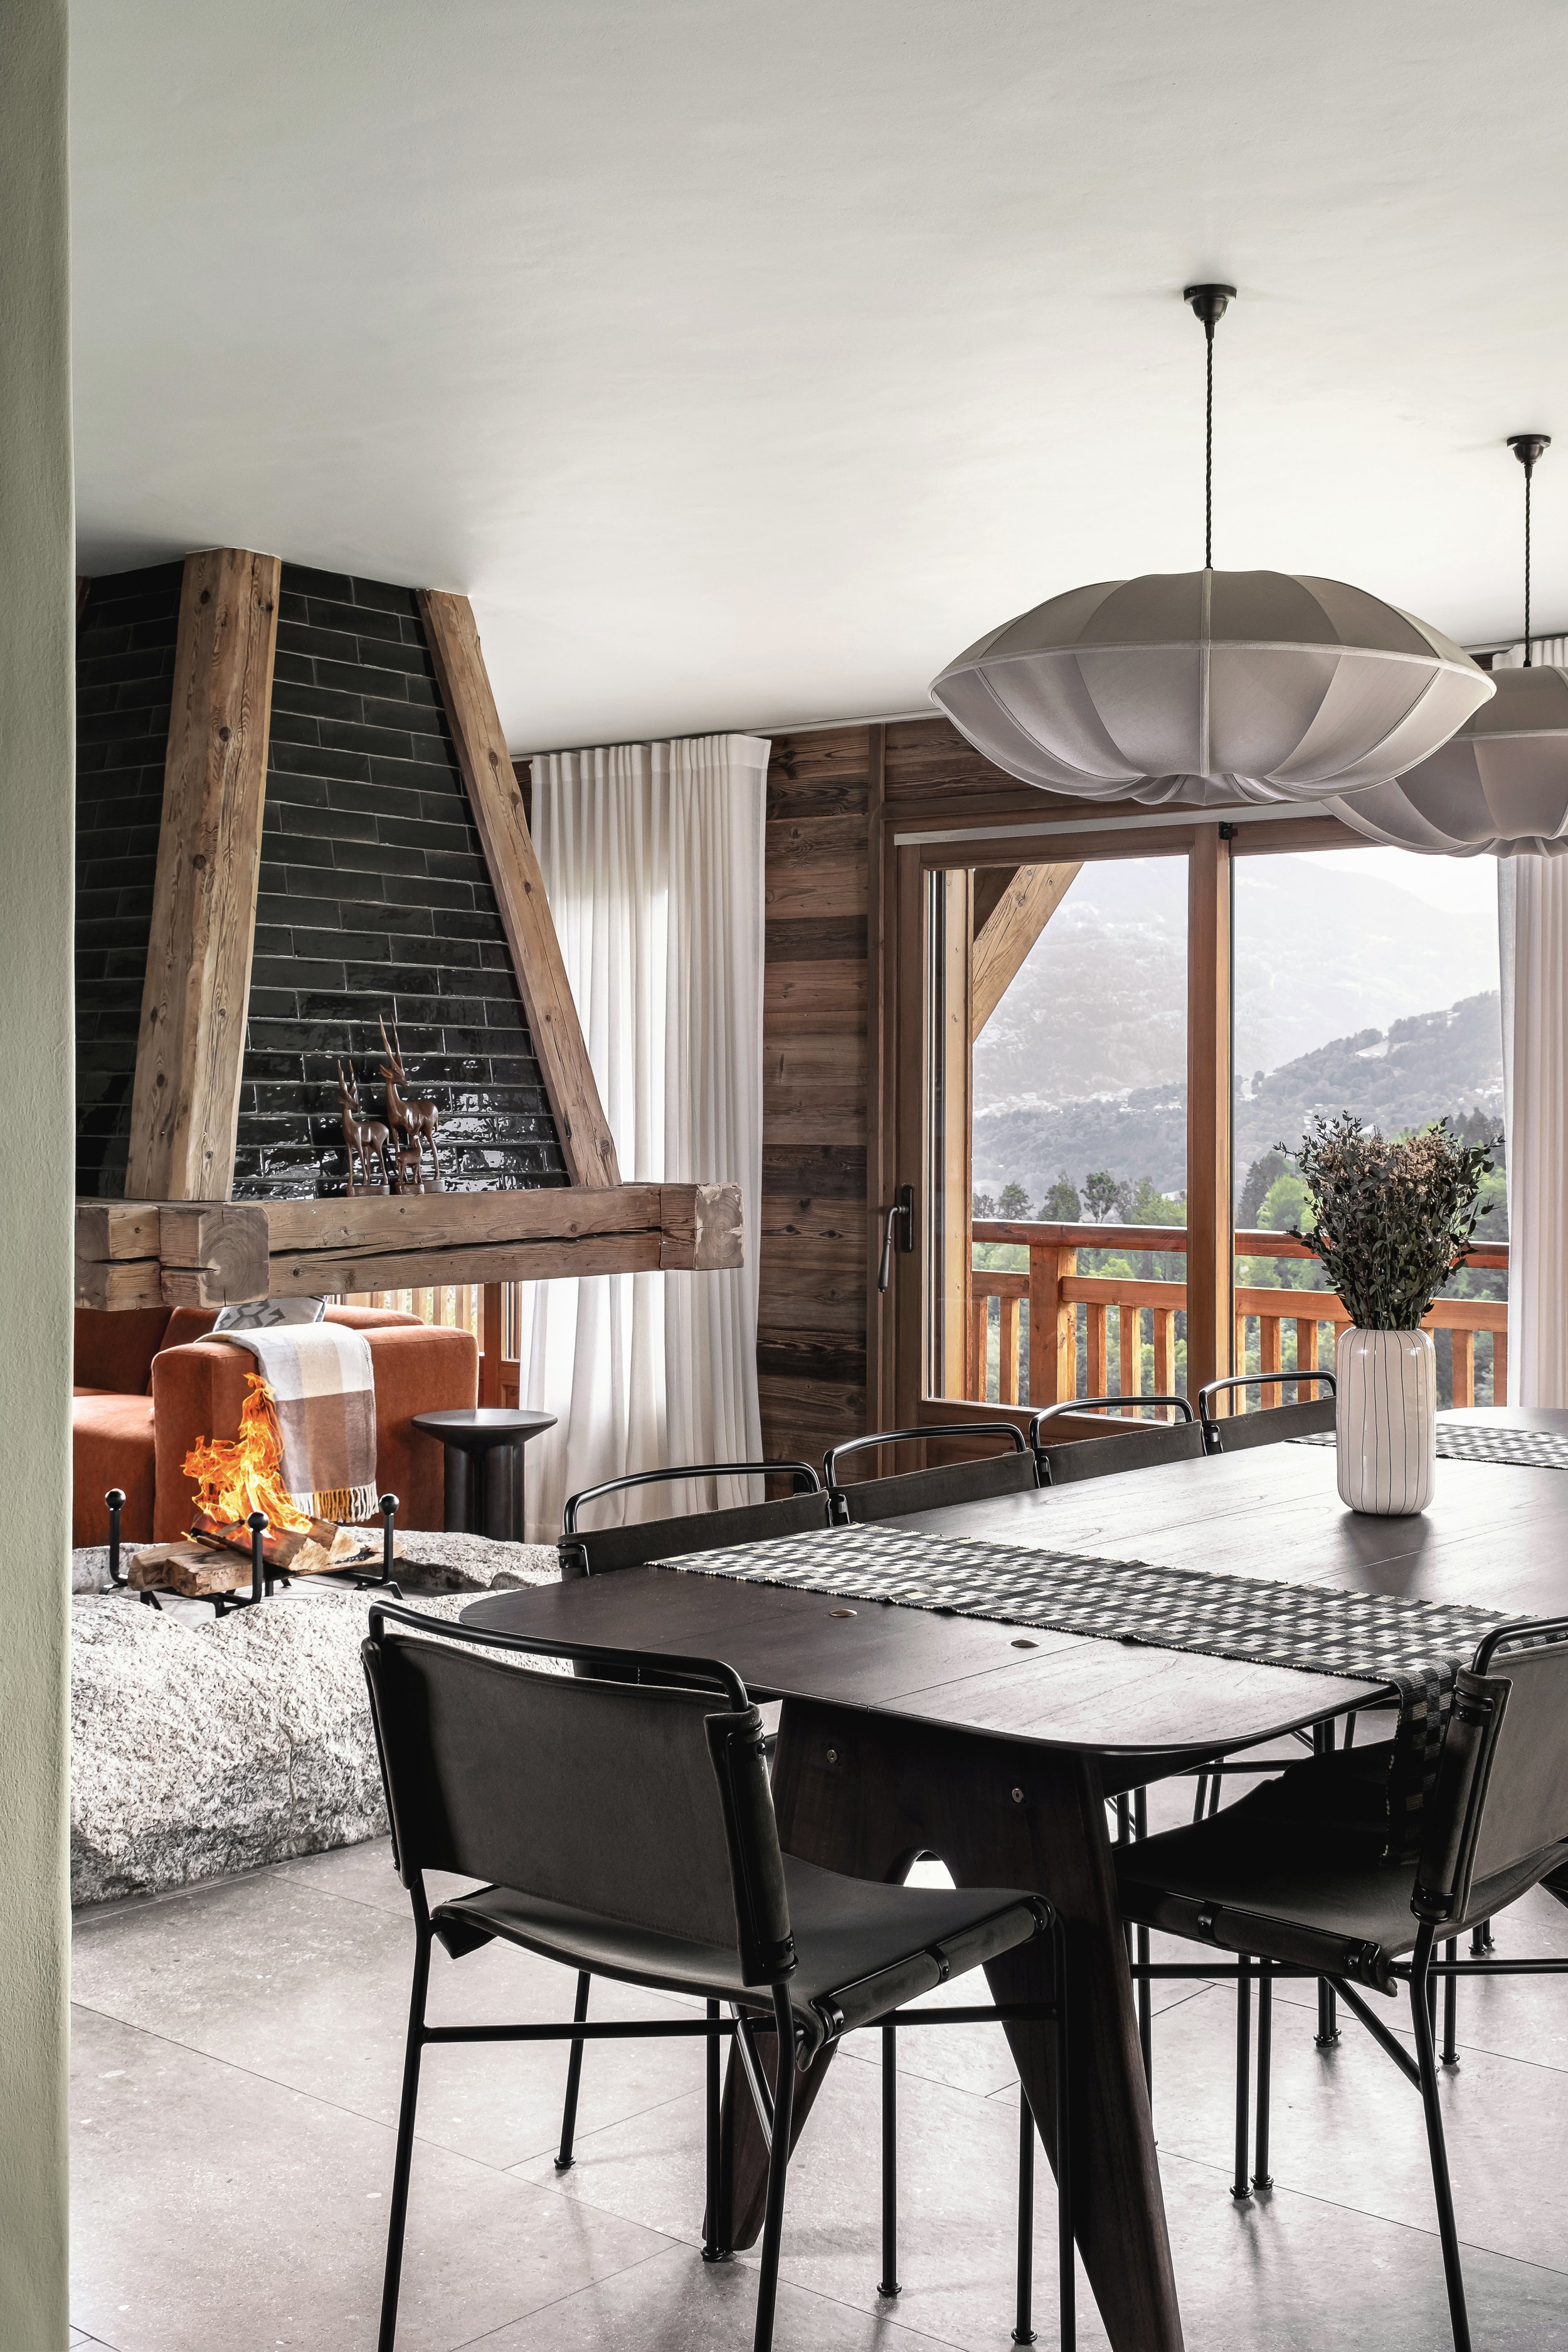 Francis+York+Discover This Luxury Chalet in the French Alps From The August Premium Collection 00051.jpg